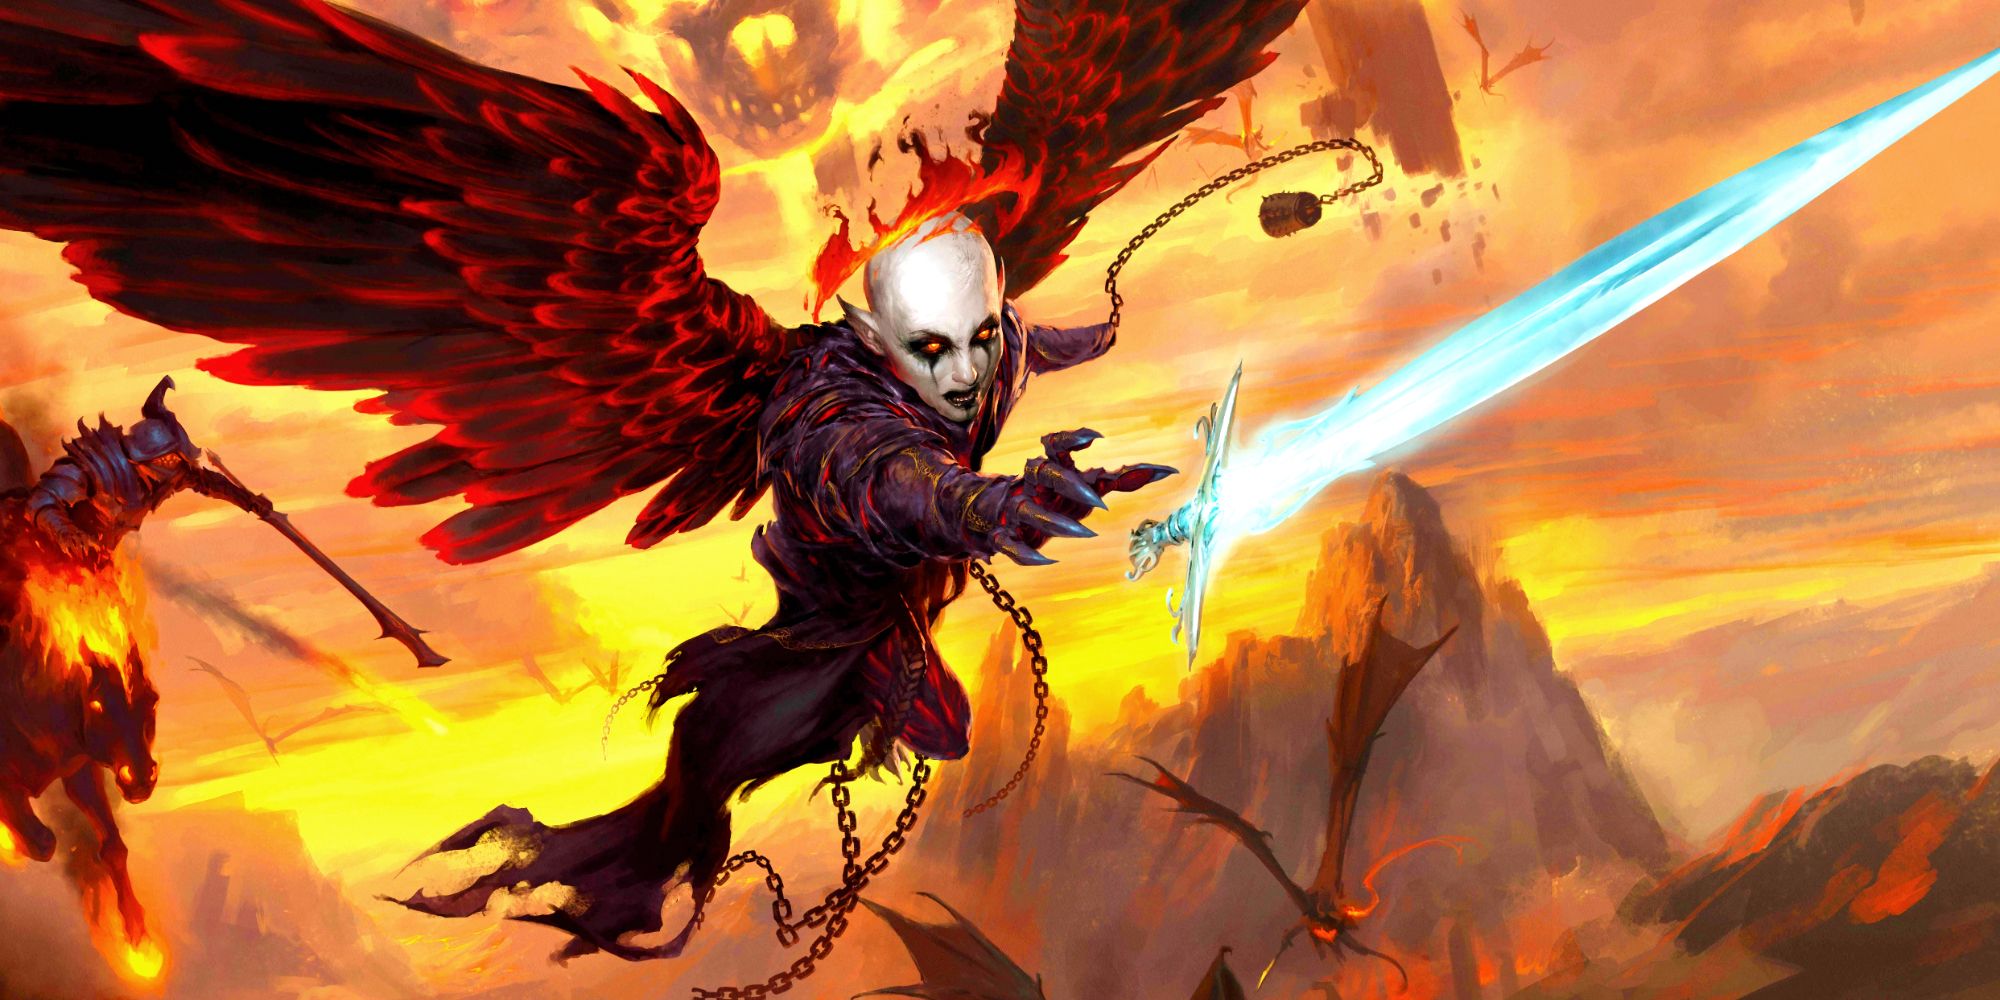 A winged demon with a bald head, pointed ears, and bright red eyes flying through a hellscape. She is reaching one clawed hand out toward a bright blue, magical sword.